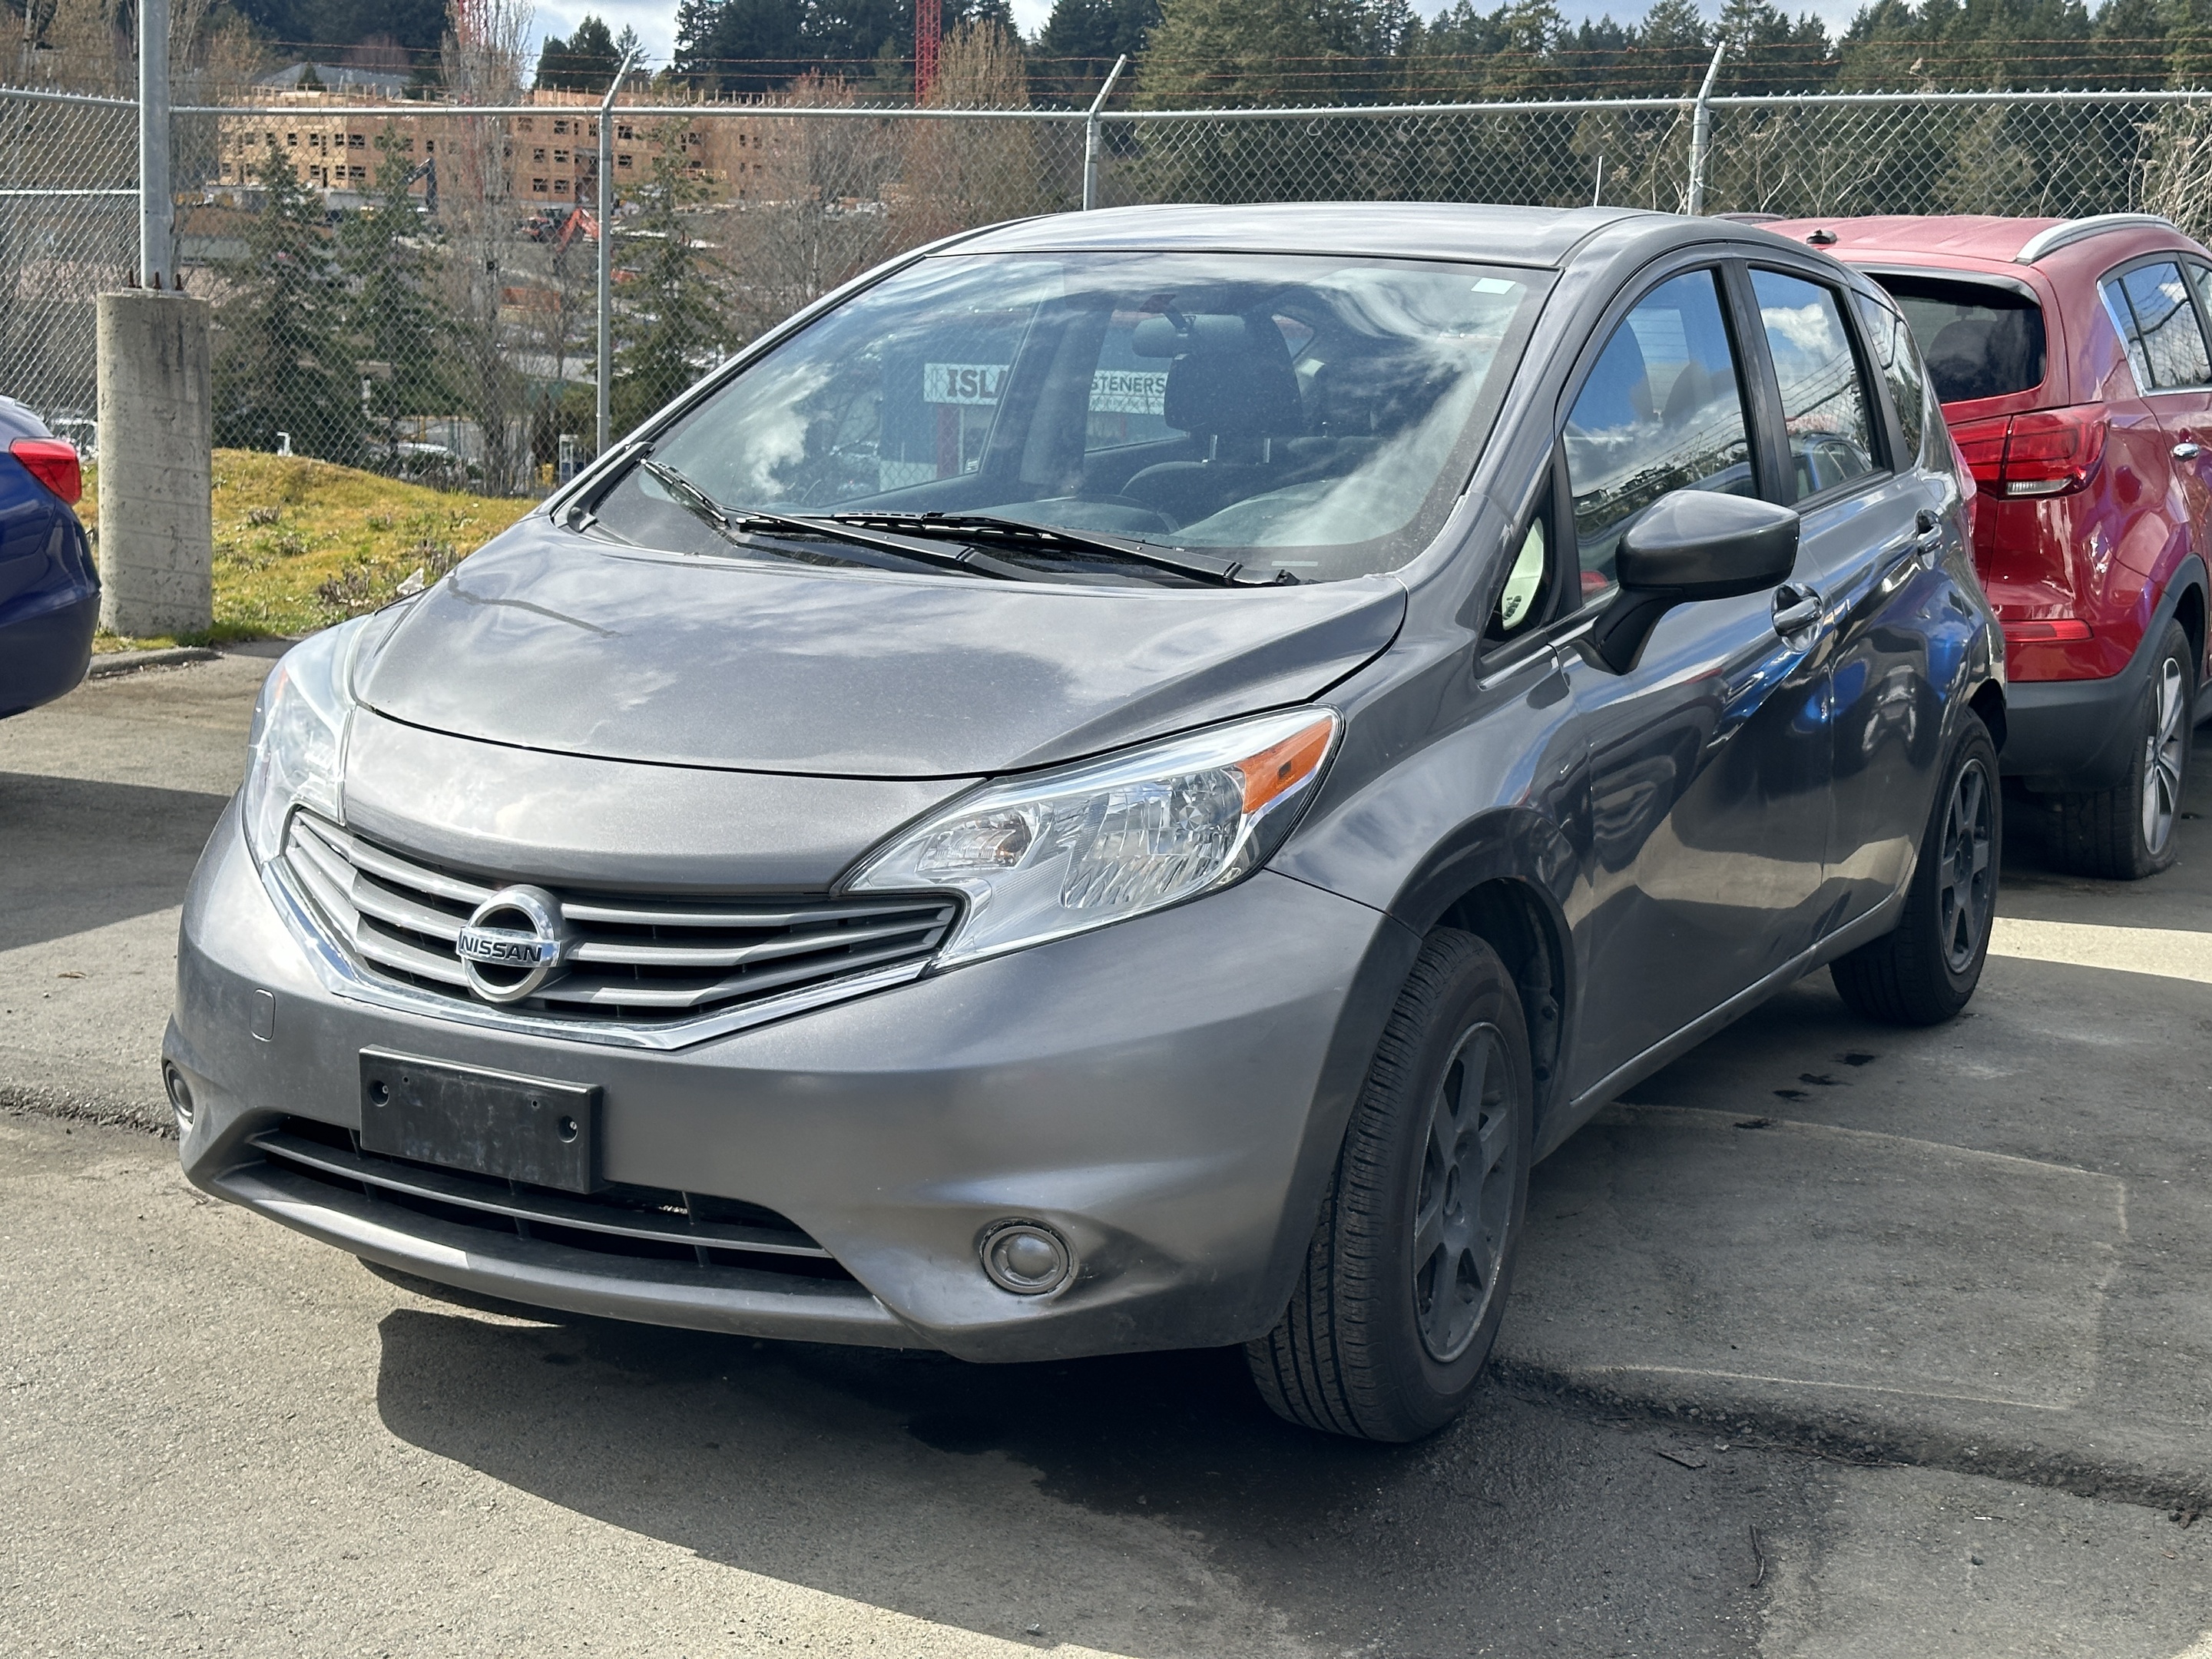 2016 Nissan Versa Note S FWD-AM/FM/CD/Aux-In, Air Conditioning 